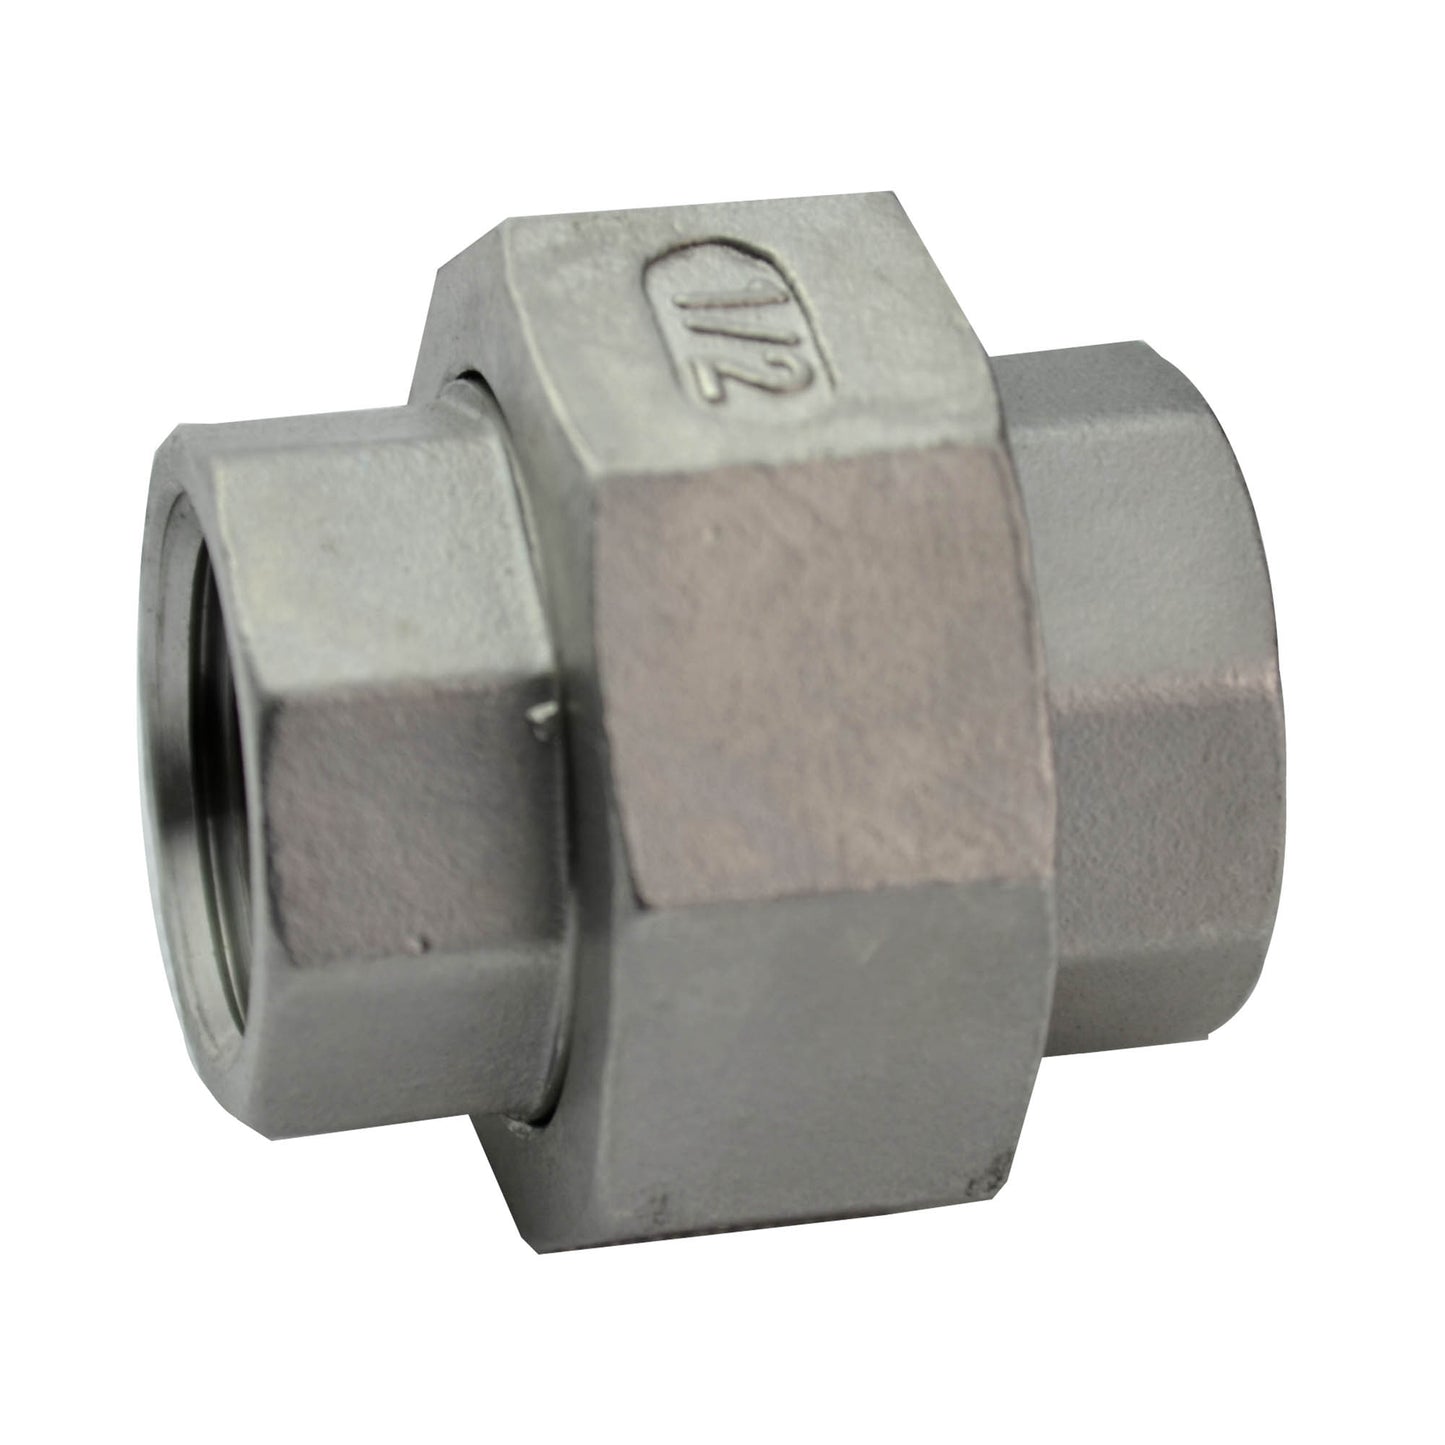 3/4" Union - Stainless Steel Fitting